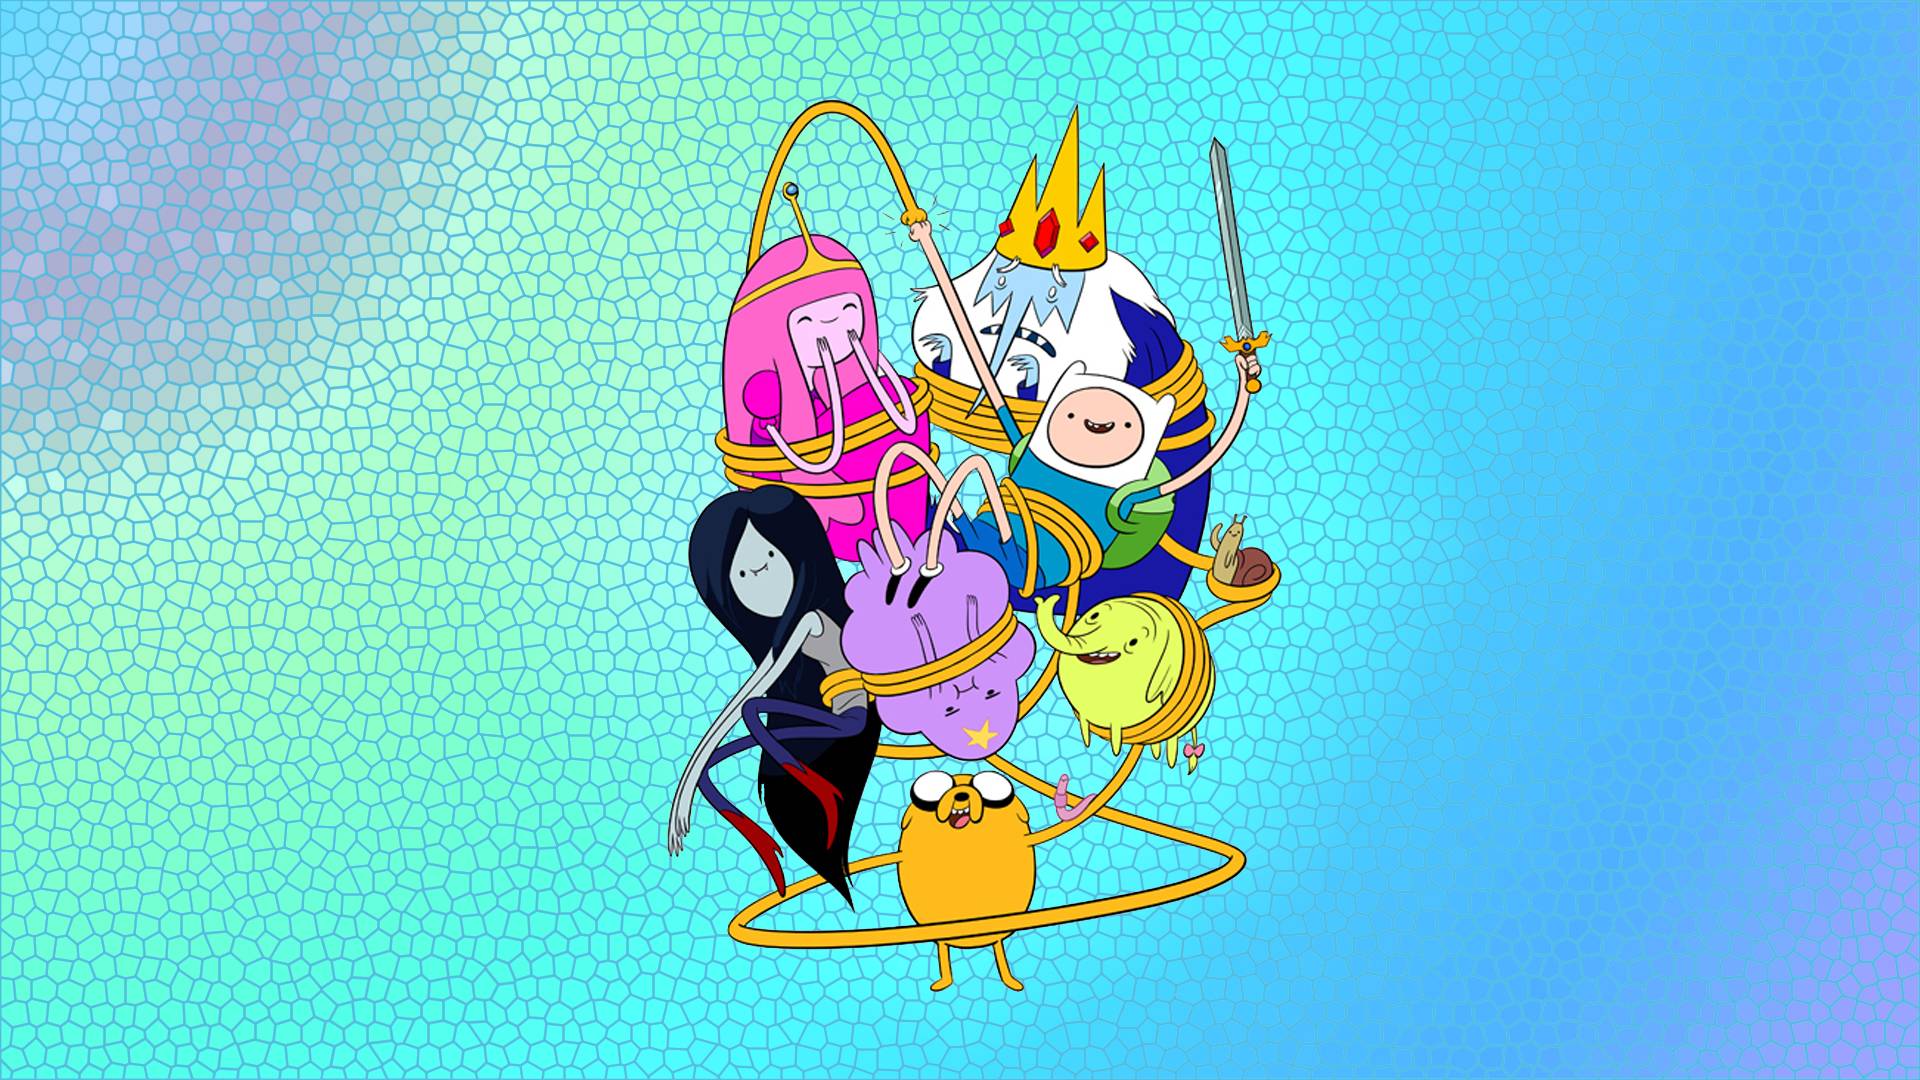 Adventure Time Computer Wallpaper Free Adventure Time